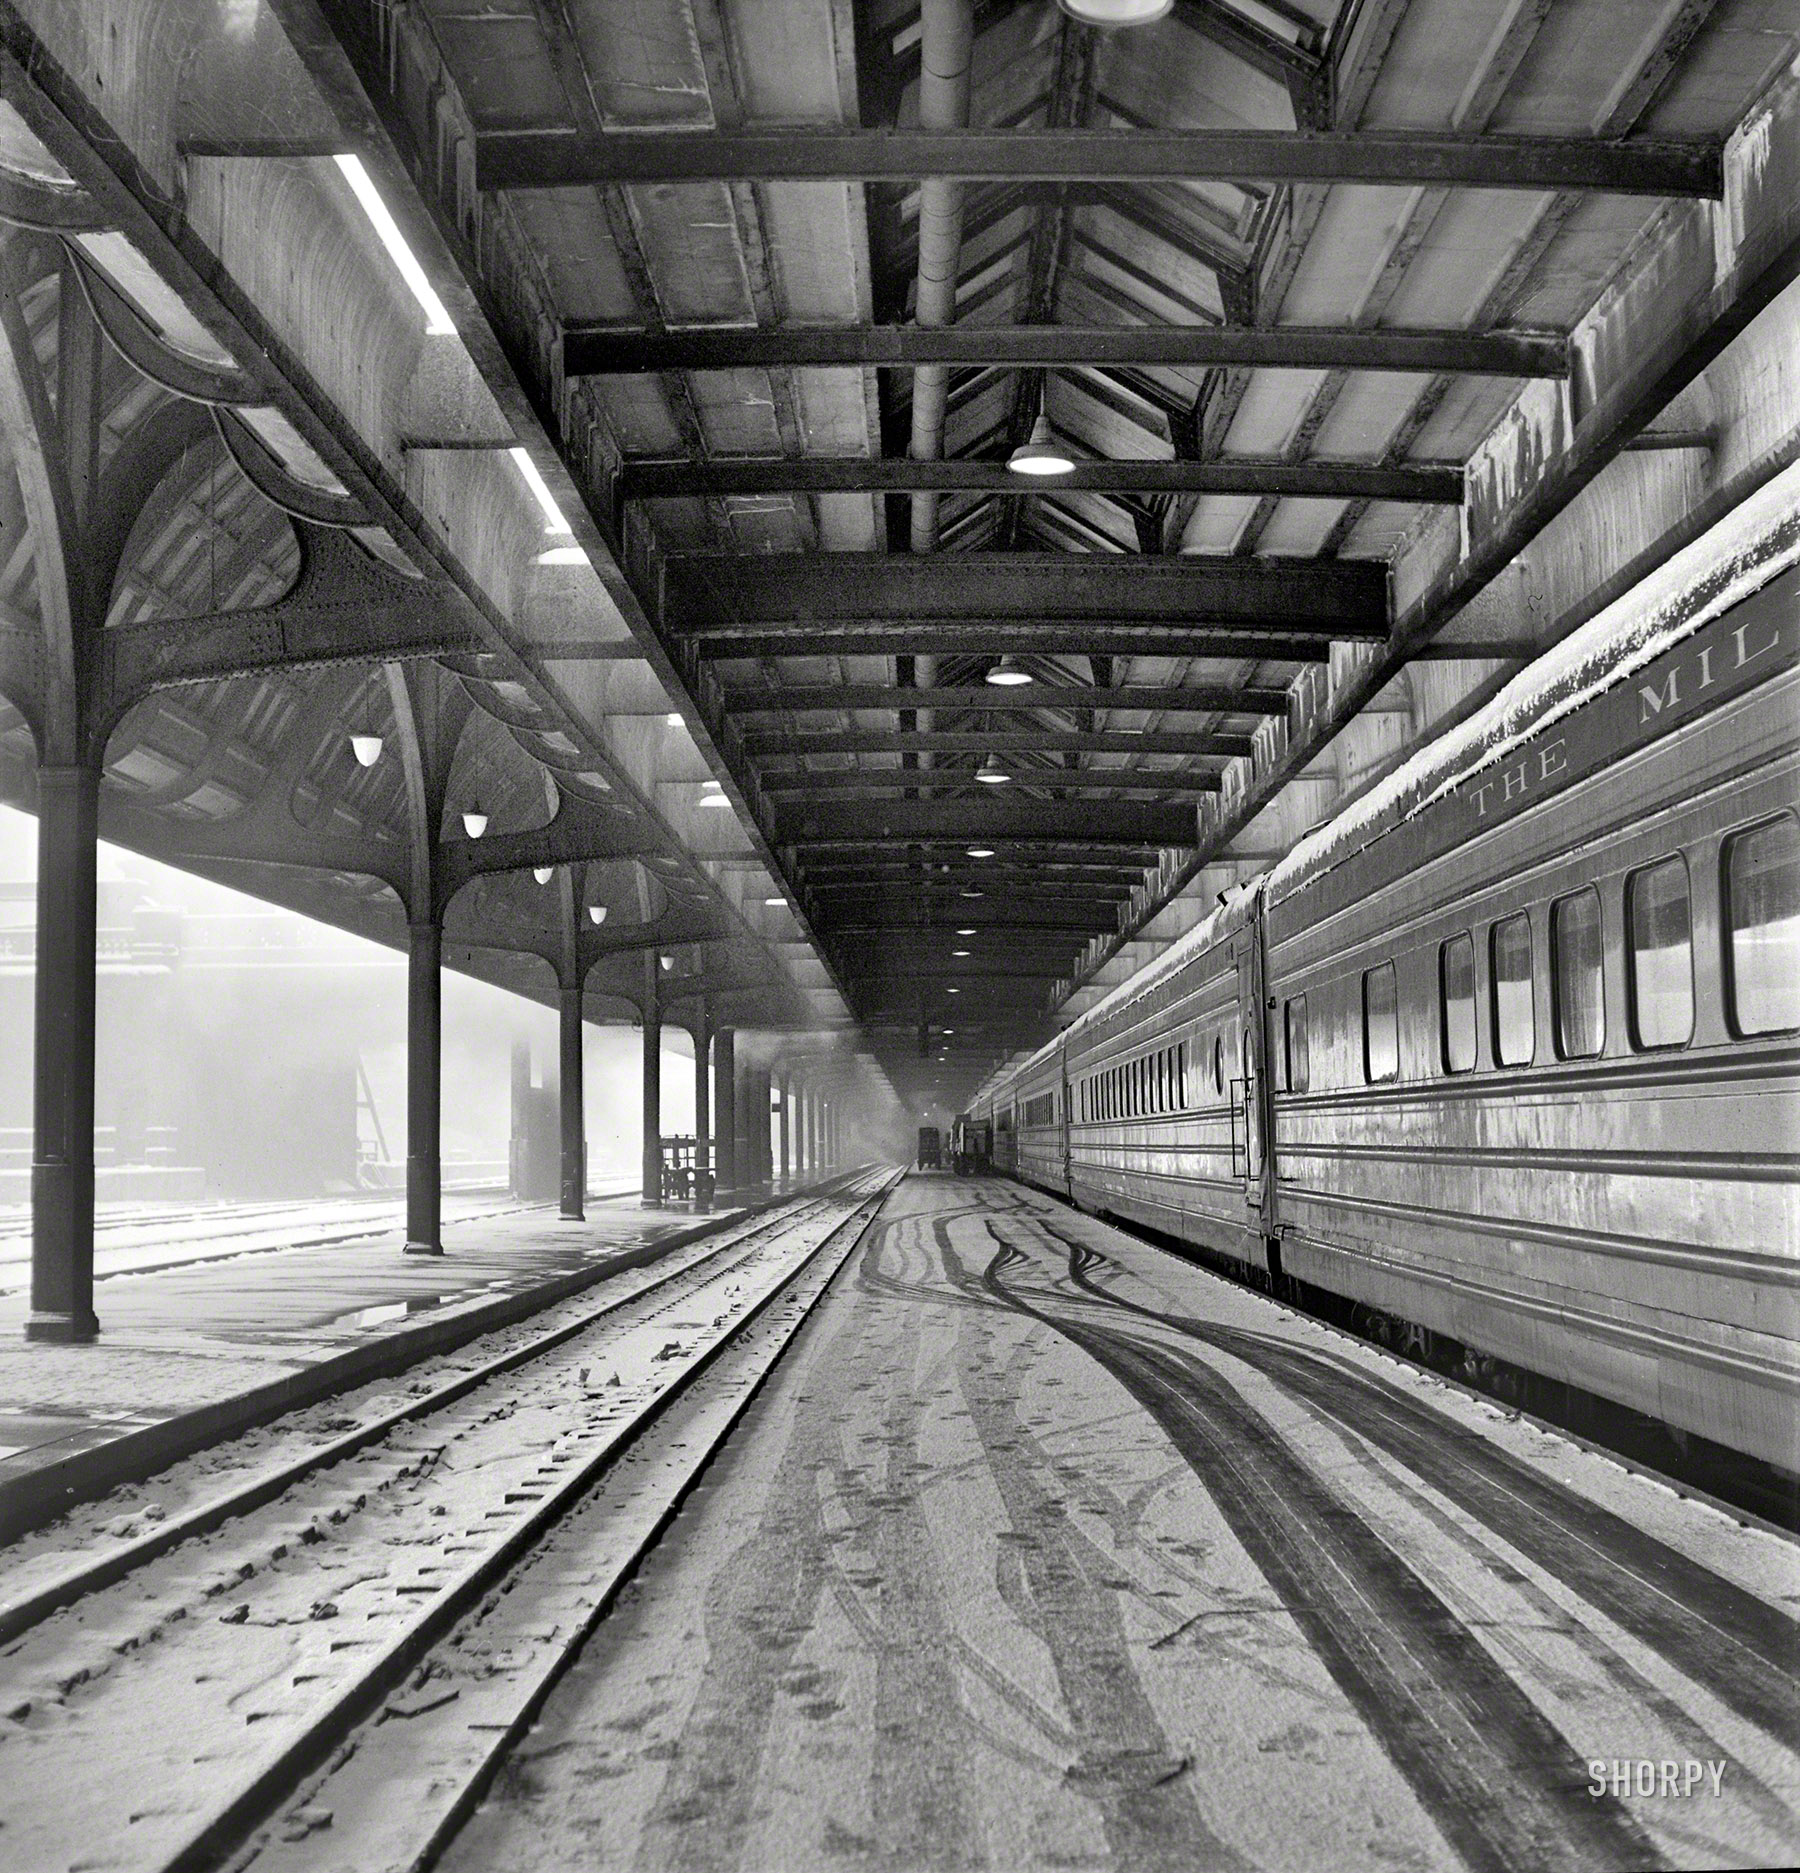 January 1943. "A Chicago, Milwaukee, Saint Paul & Pacific Railroad train just arrived at Chicago Union Station." Medium format nitrate negative by Jack Delano for the Office of War Information. View full size.